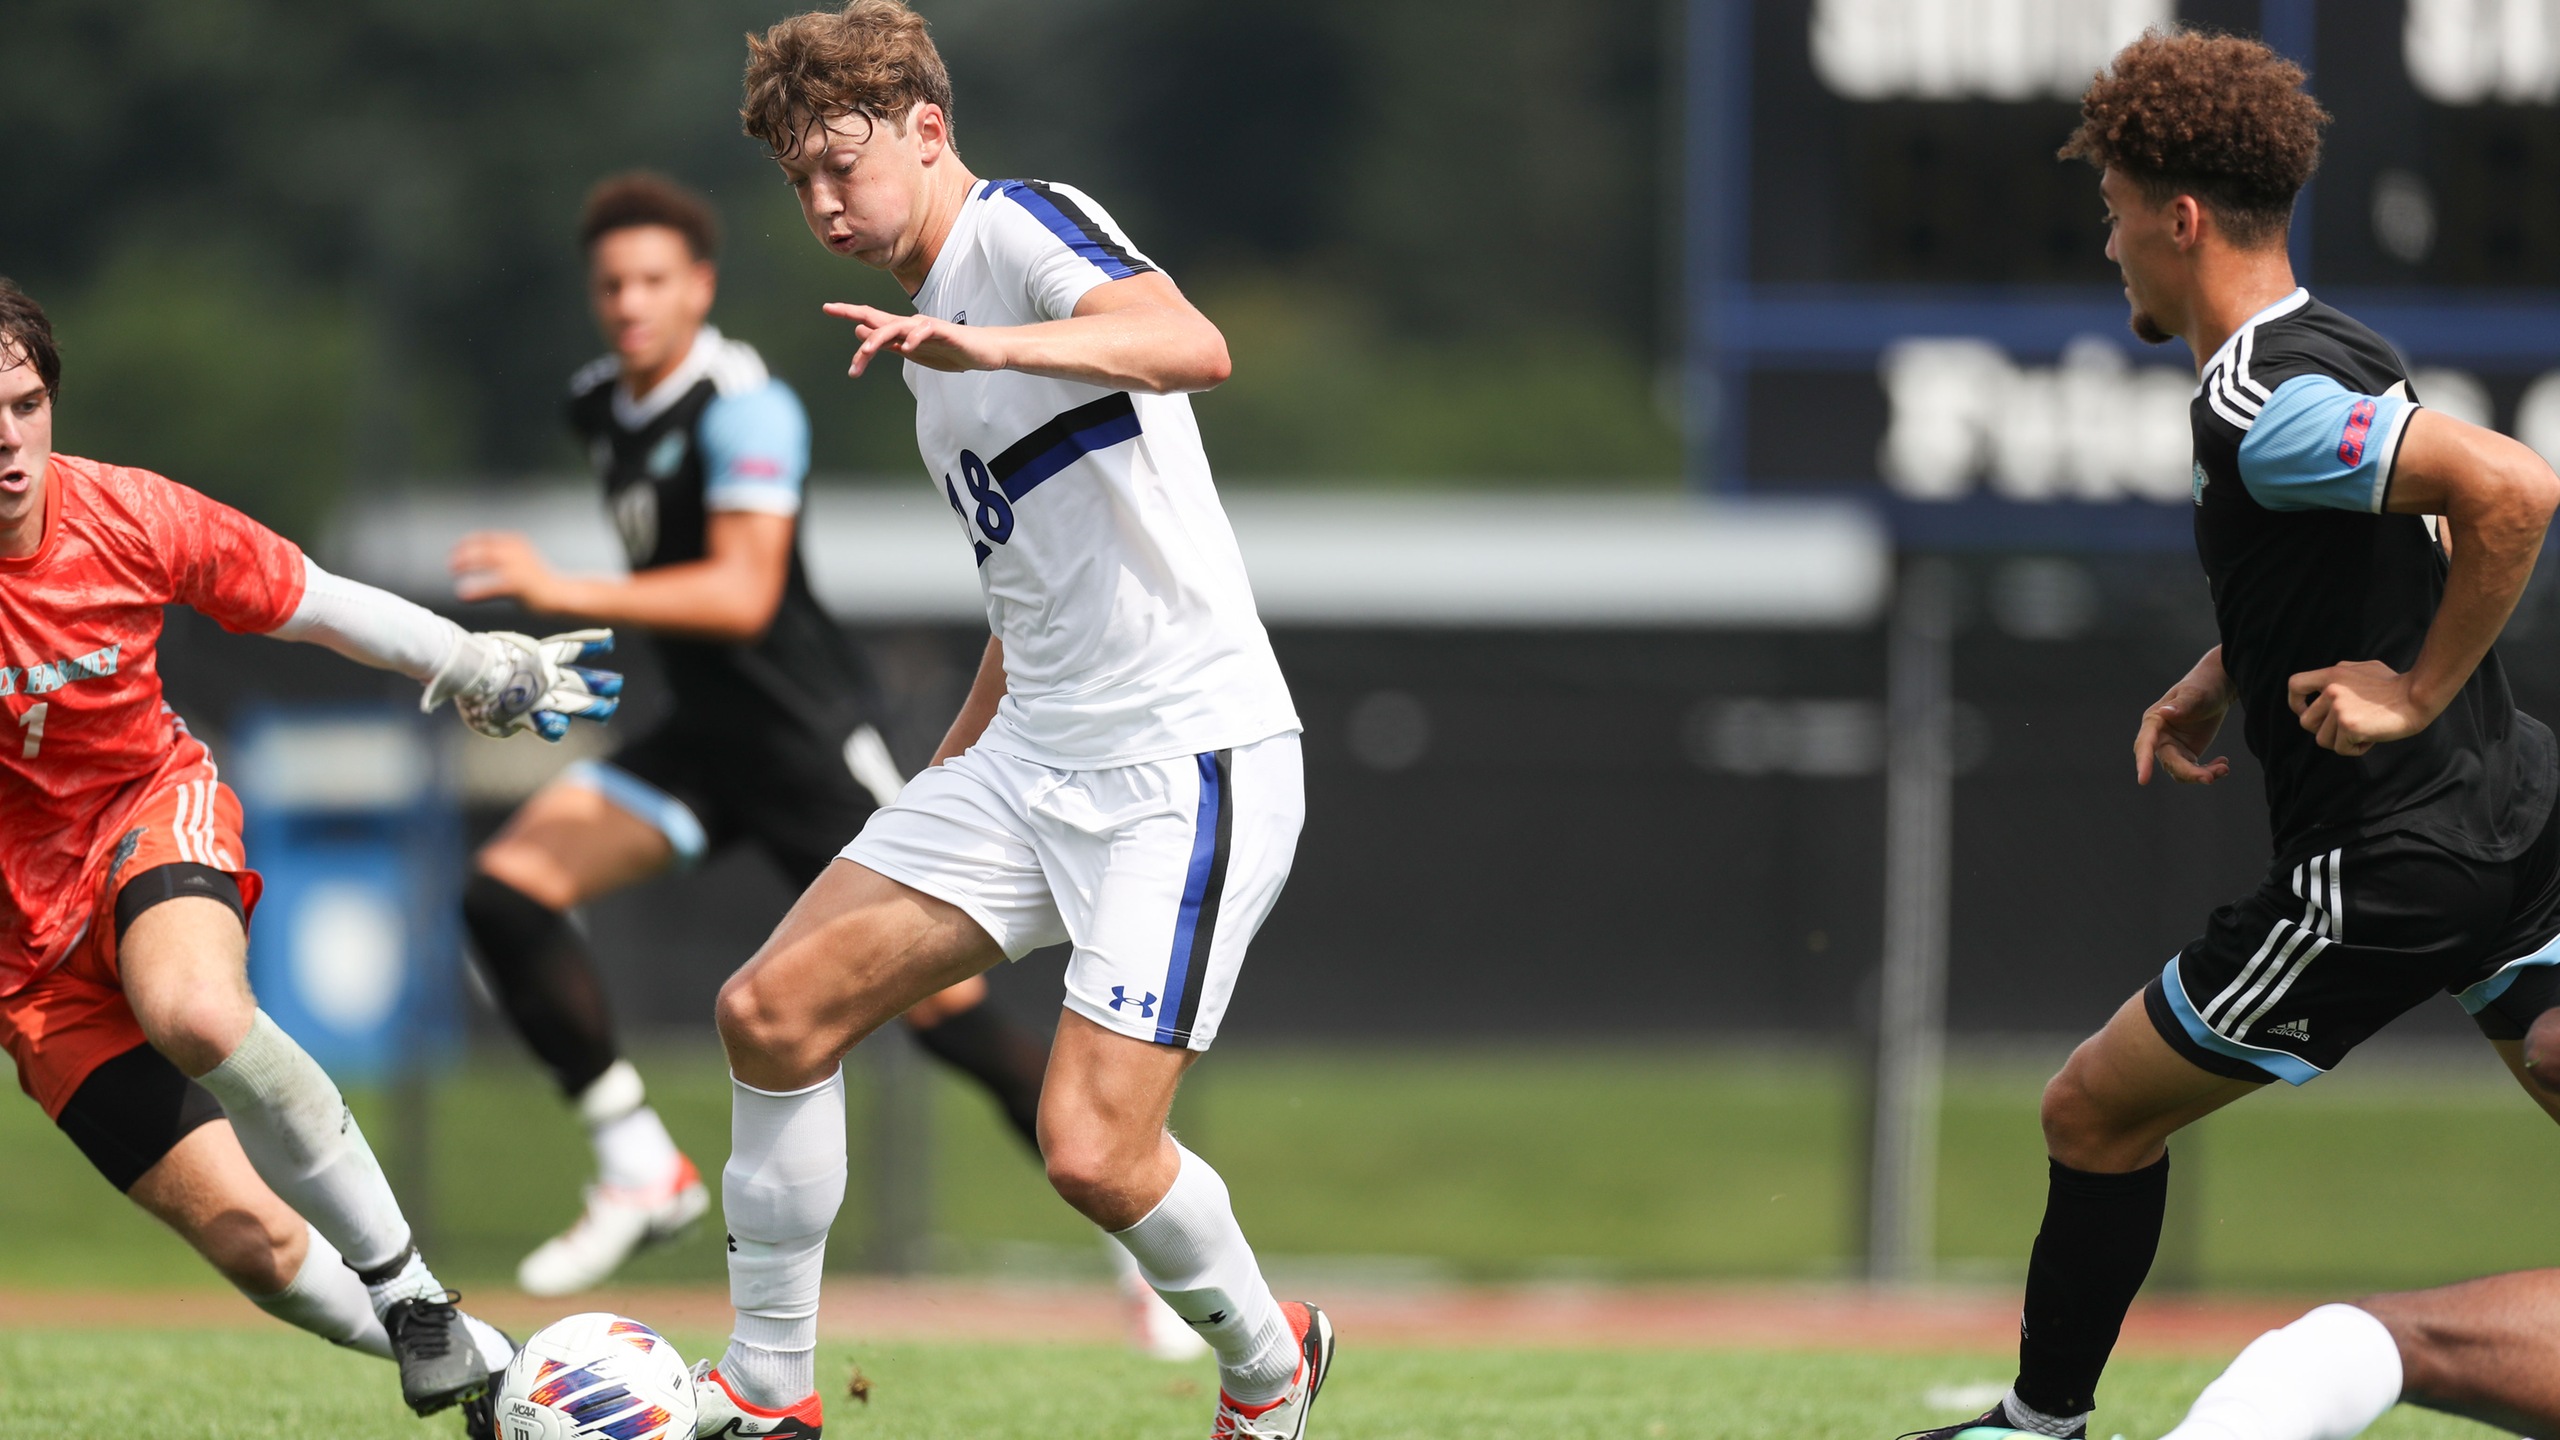 Men’s Soccer Falls to Holy Family 4-3 in Back-and-Forth Match